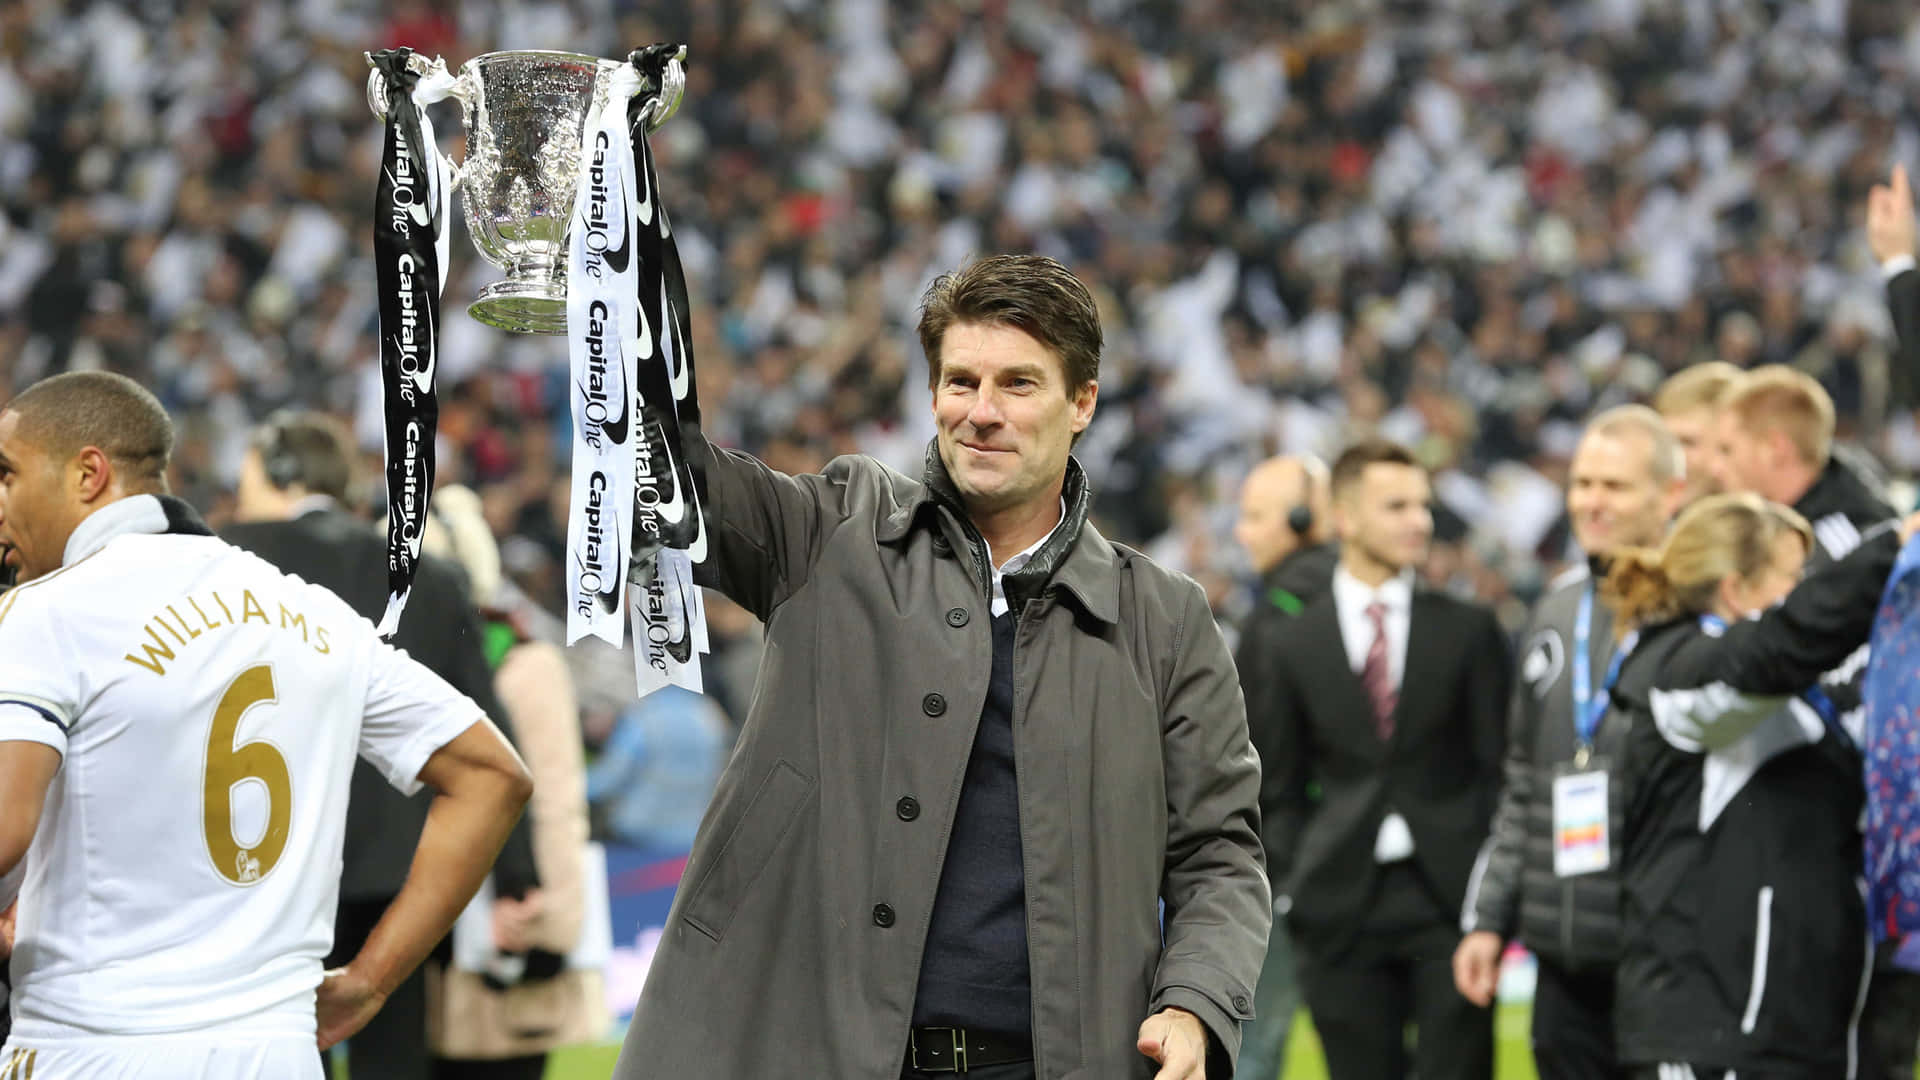 Michael Laudrup Holding Capital One Cup Wallpaper